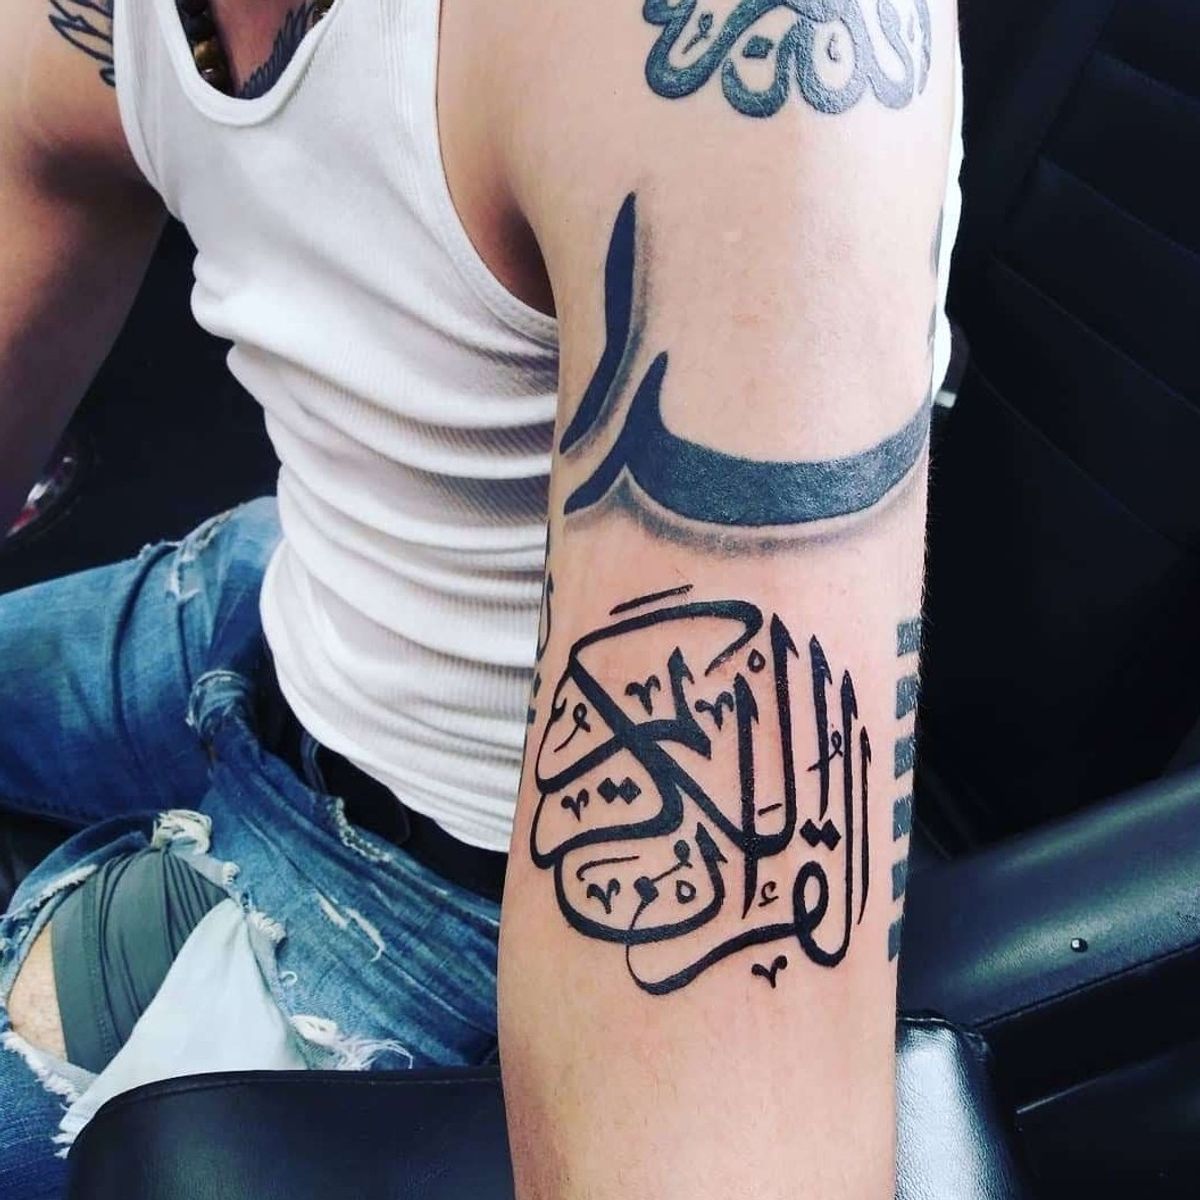 Tattoo uploaded by Hans Forrestal • The book of God in Arabic from the ...